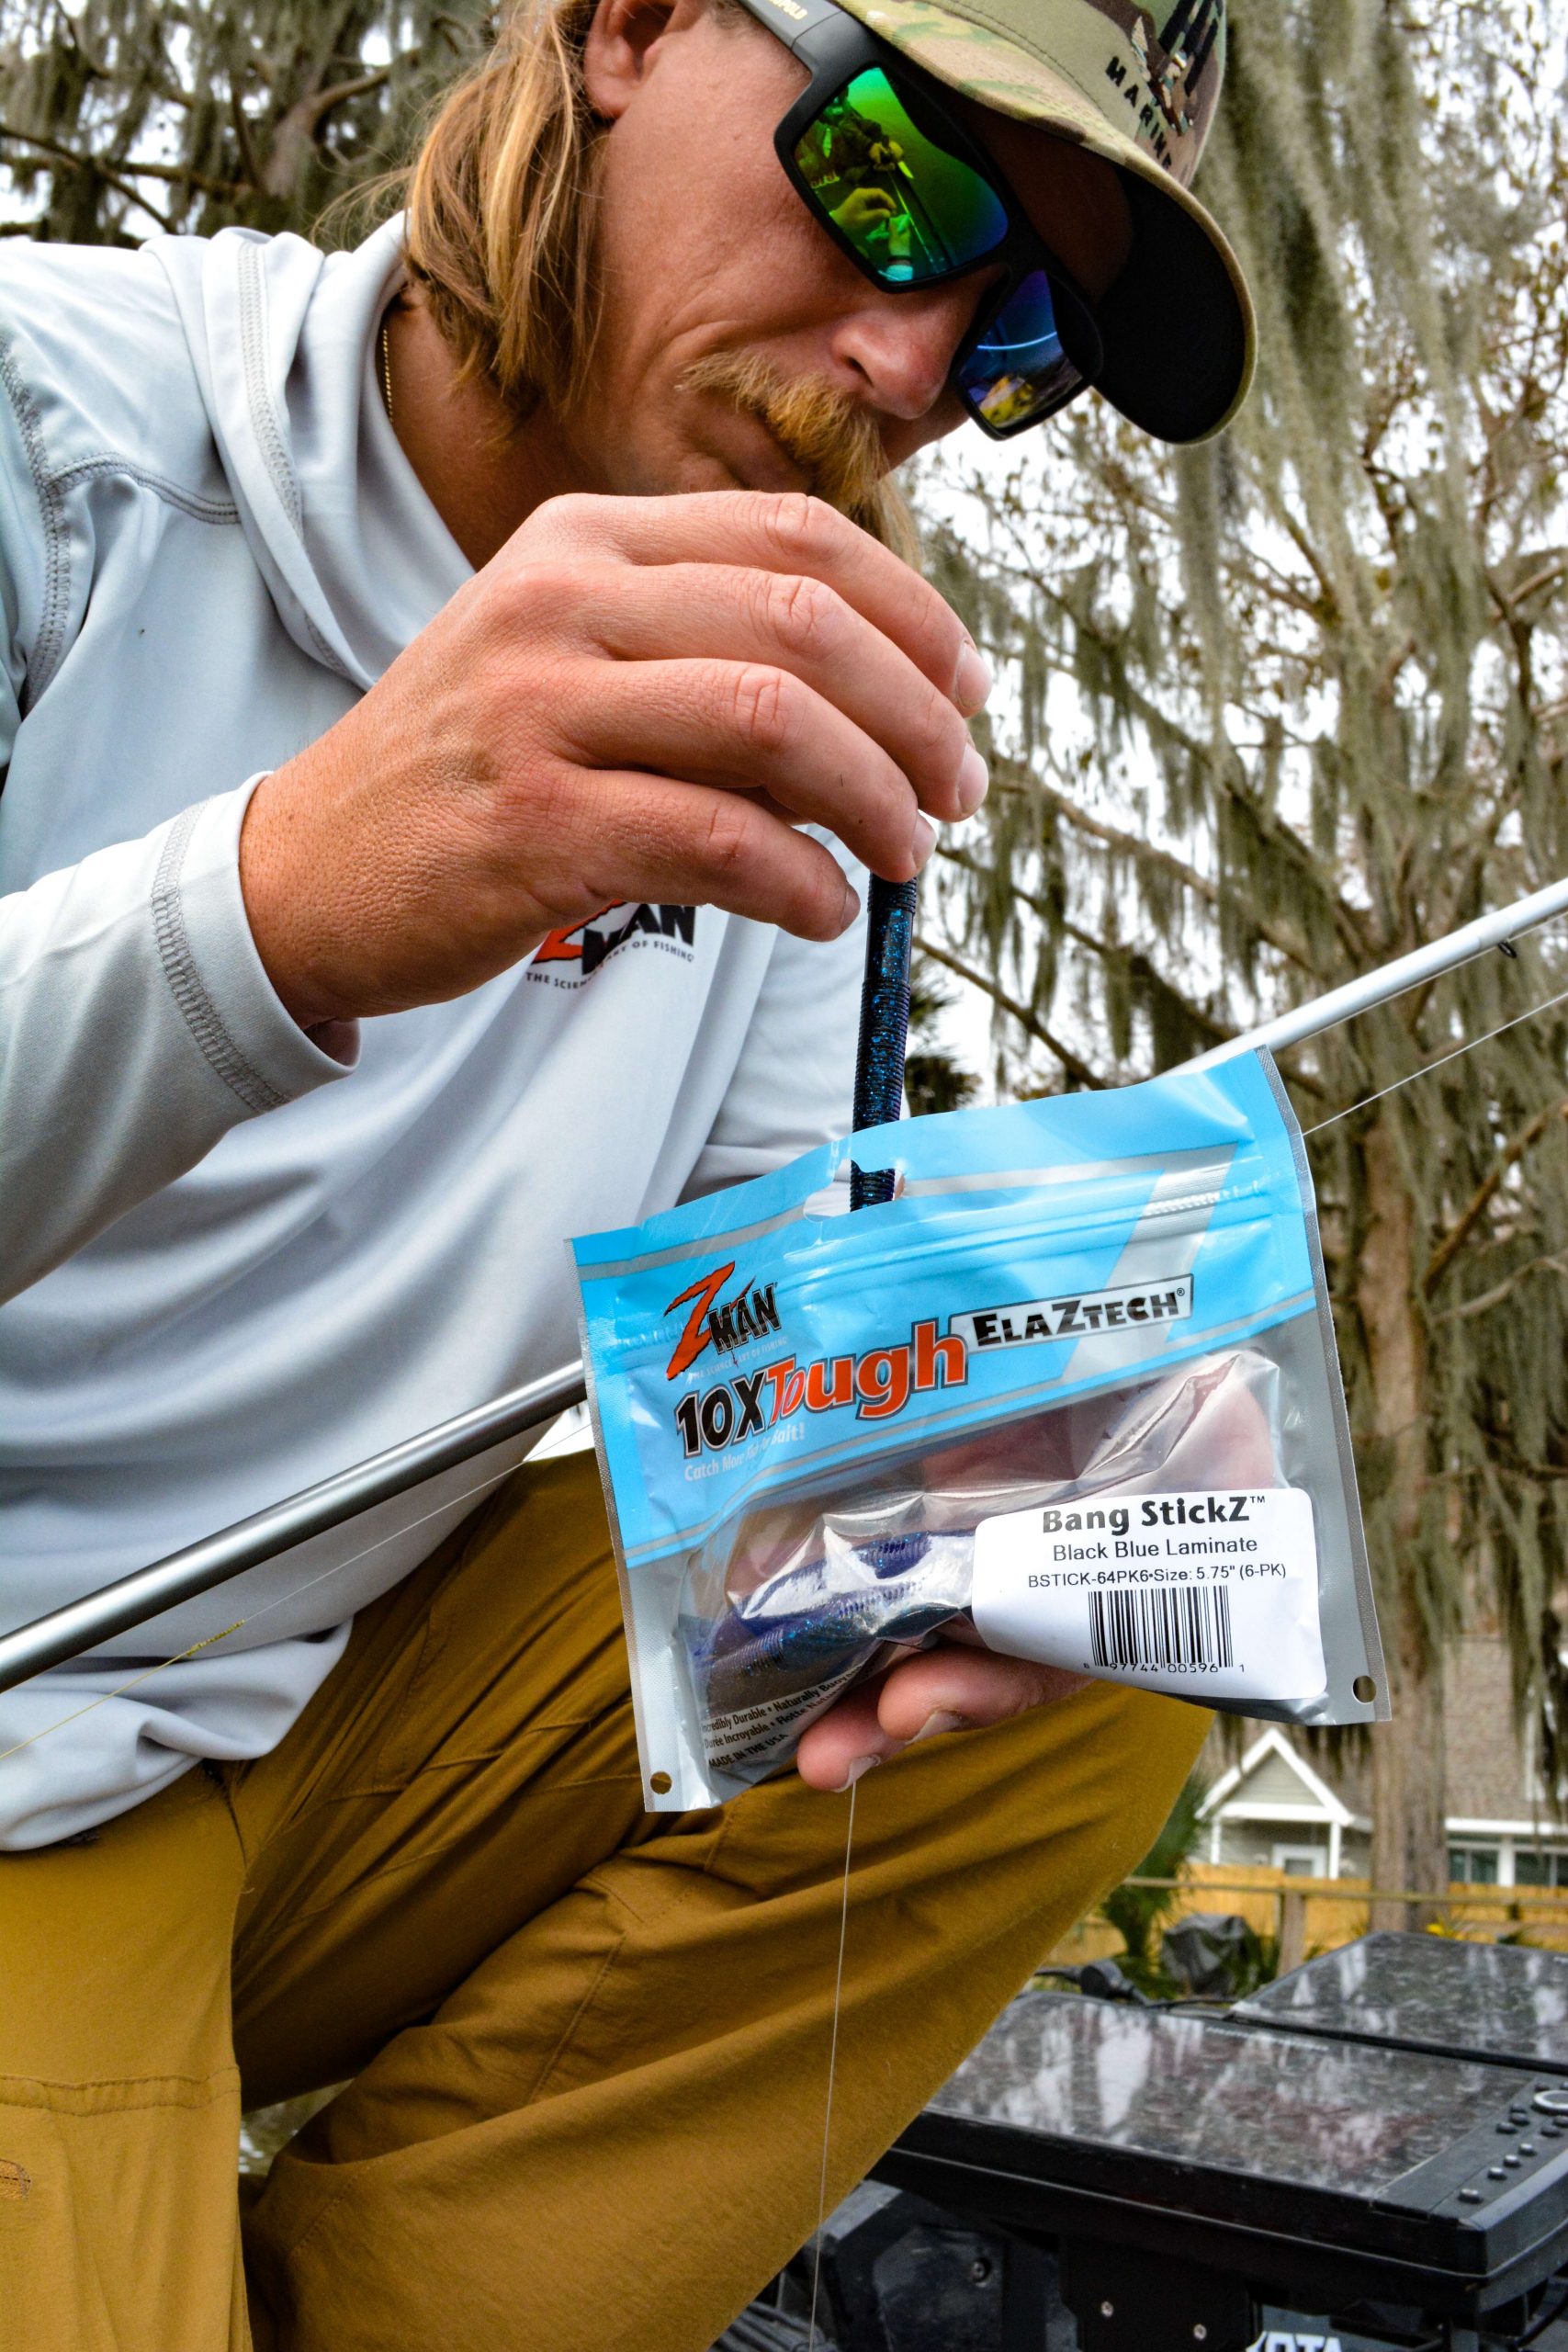 Z-Man pro Seth Feider starts the day with a dip into his bag of Bang StickZ, one of Feiderâs big fish favorites.